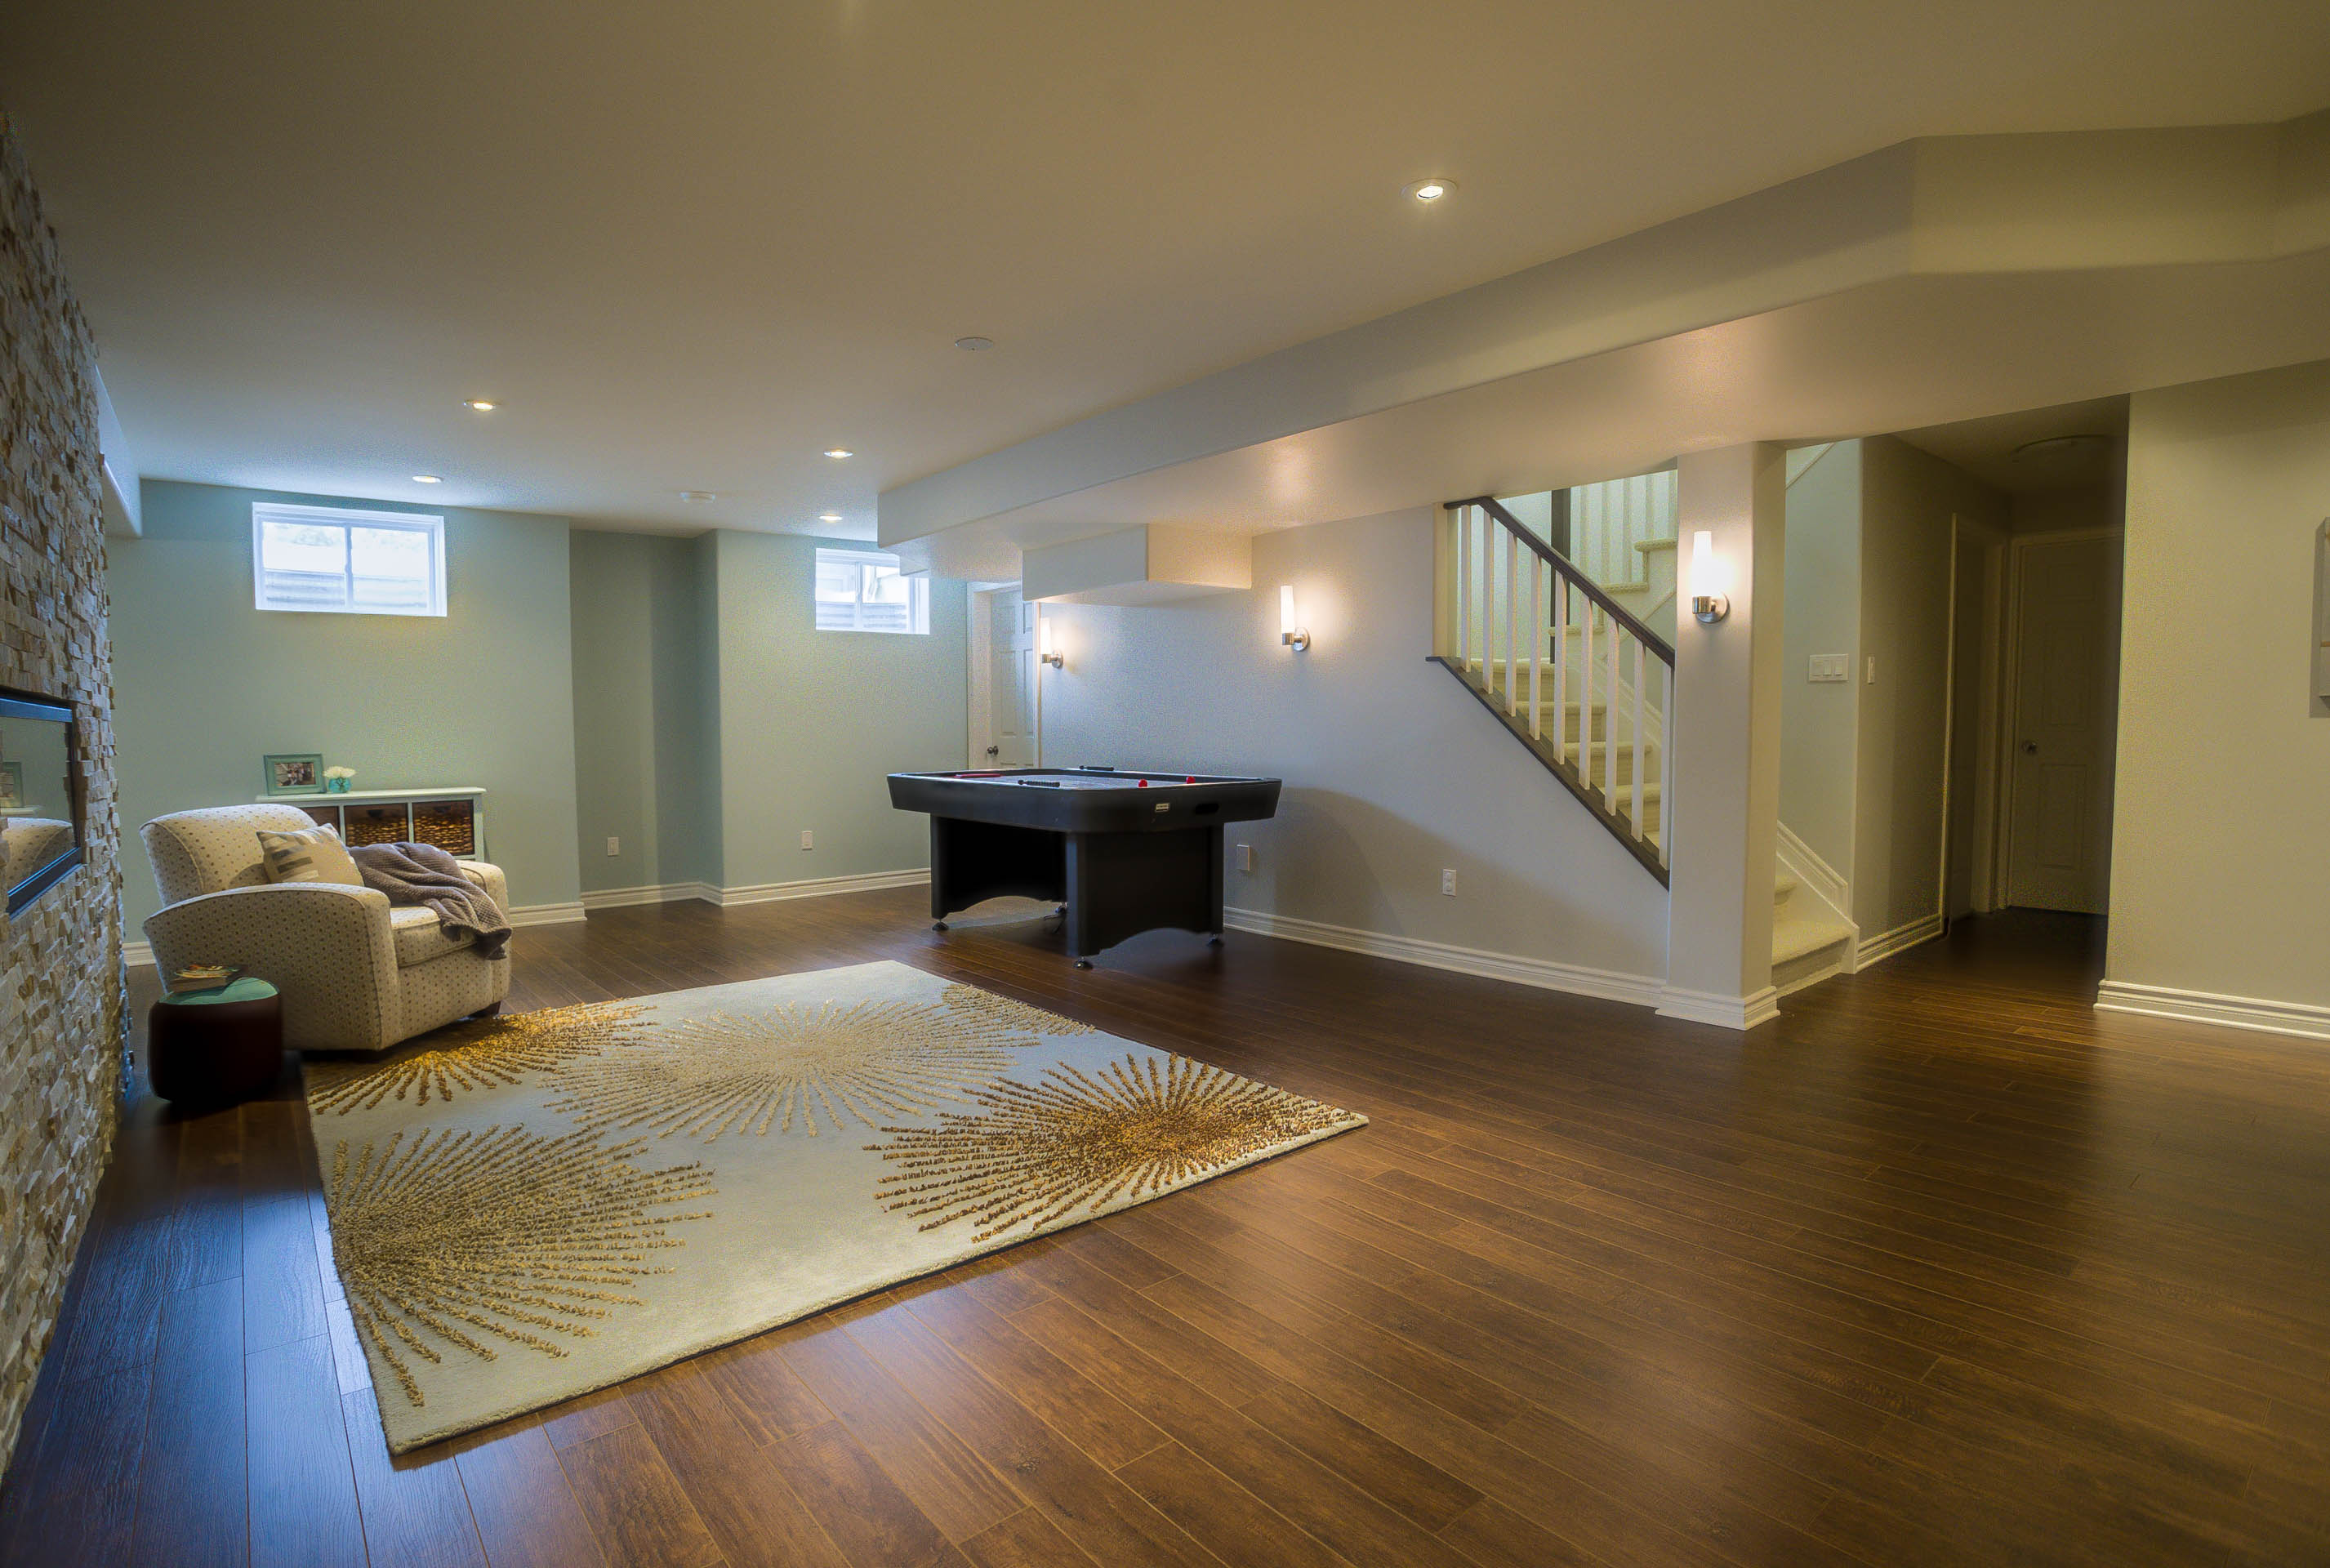 Laminate Flooring Is A Great Option For, What To Put Under Laminate Flooring In Basement